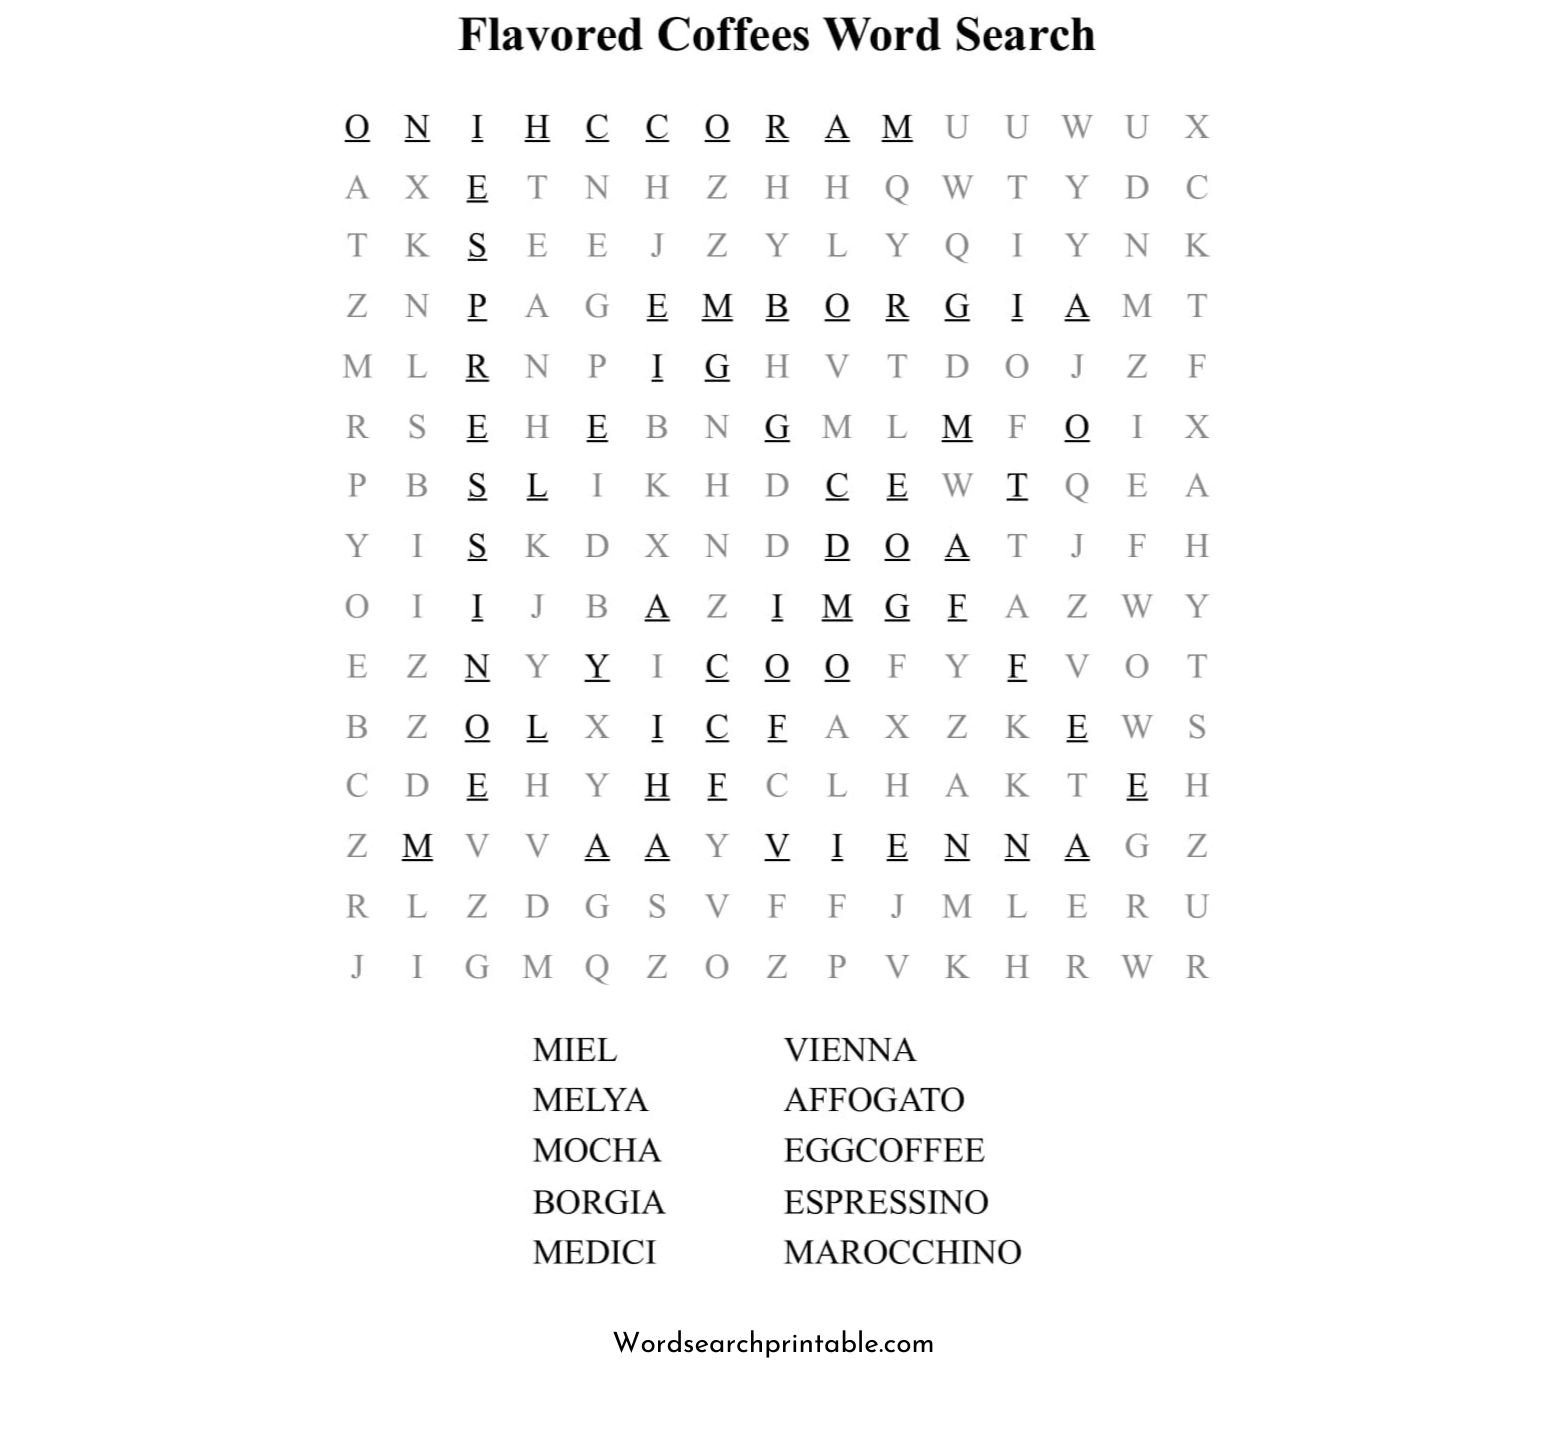 flavored coffees word search puzzle solution